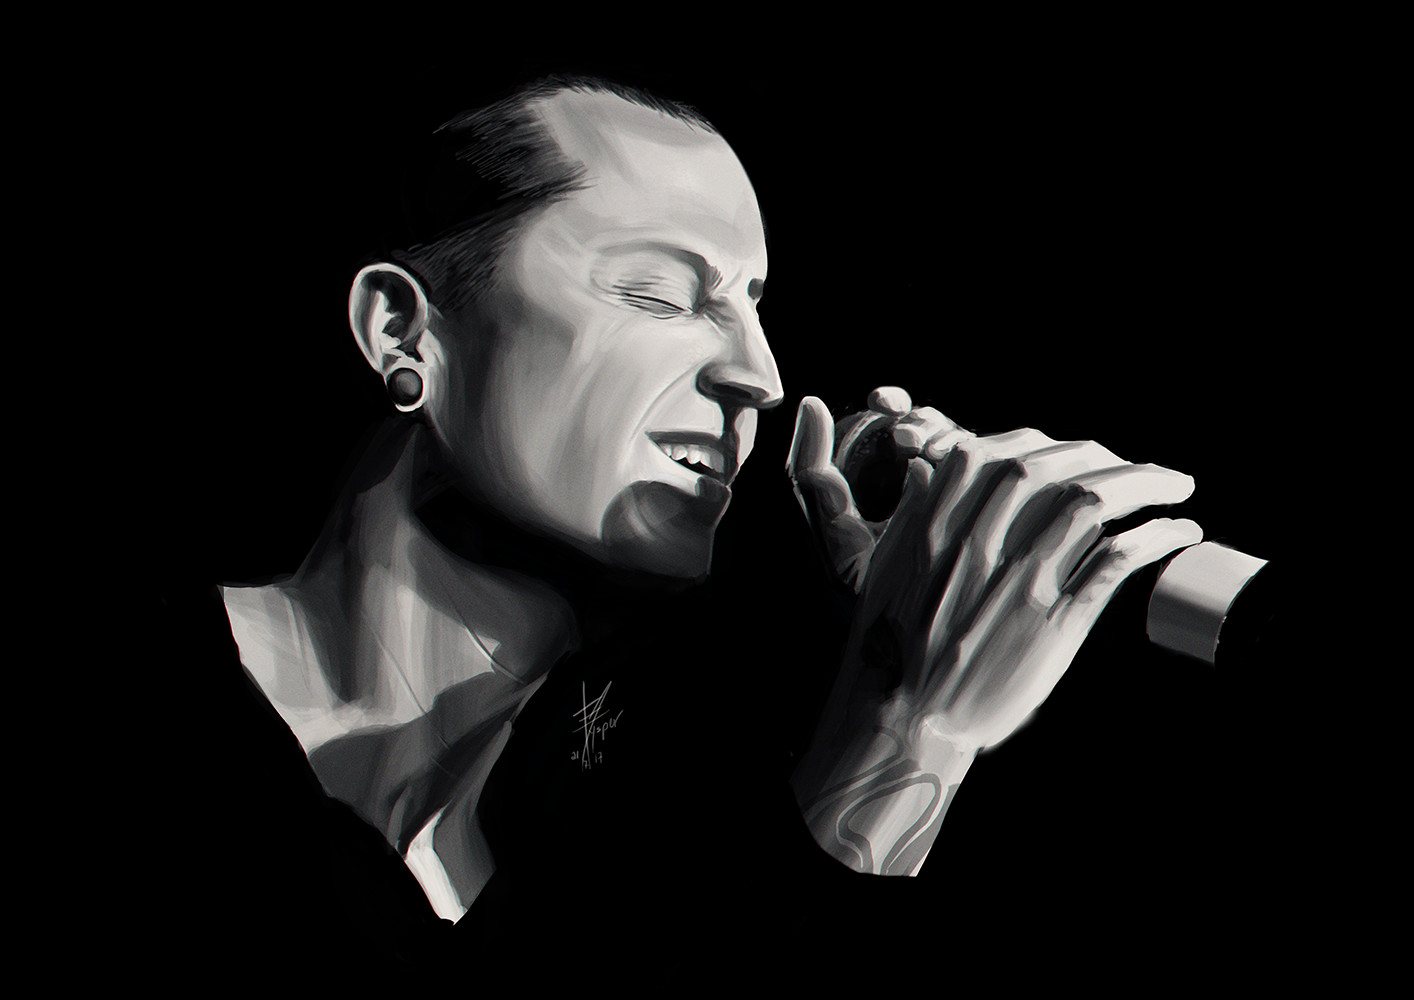 Quick Chester Bennington tribute study.
Concentrating on values.